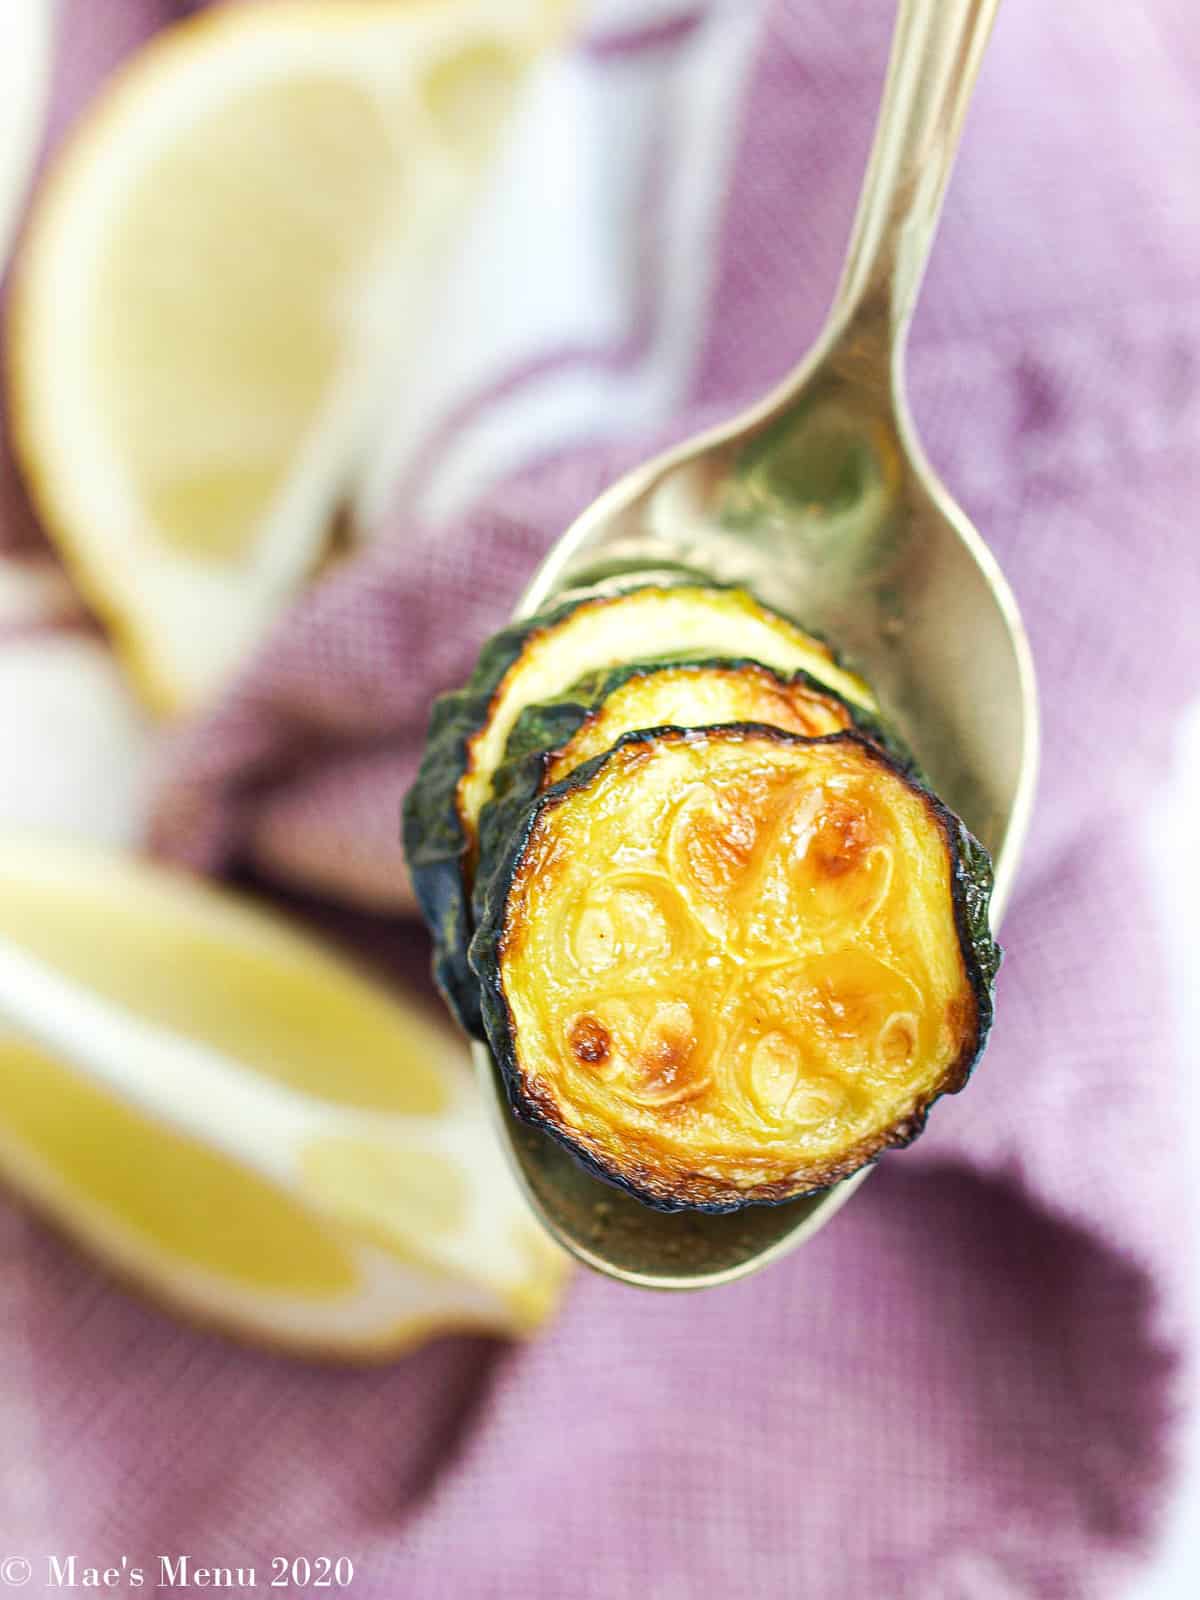 A gold spoon with air fryer zucchini on it. In the background is a purple towel and lemon slicesThis Air Fryer Zucchini is one of my favorite zucchini recipes! They made a delicious low carb side dish and are super tasty! They're one of my go-to air fryer recipes, especially when the zucchini is fresh and sweet! Make this healthy side dish for dinner this week! #zucchini #zucchinirecipes #healthysidedish #airfryer #airfryervegetables #airfryerzucchini